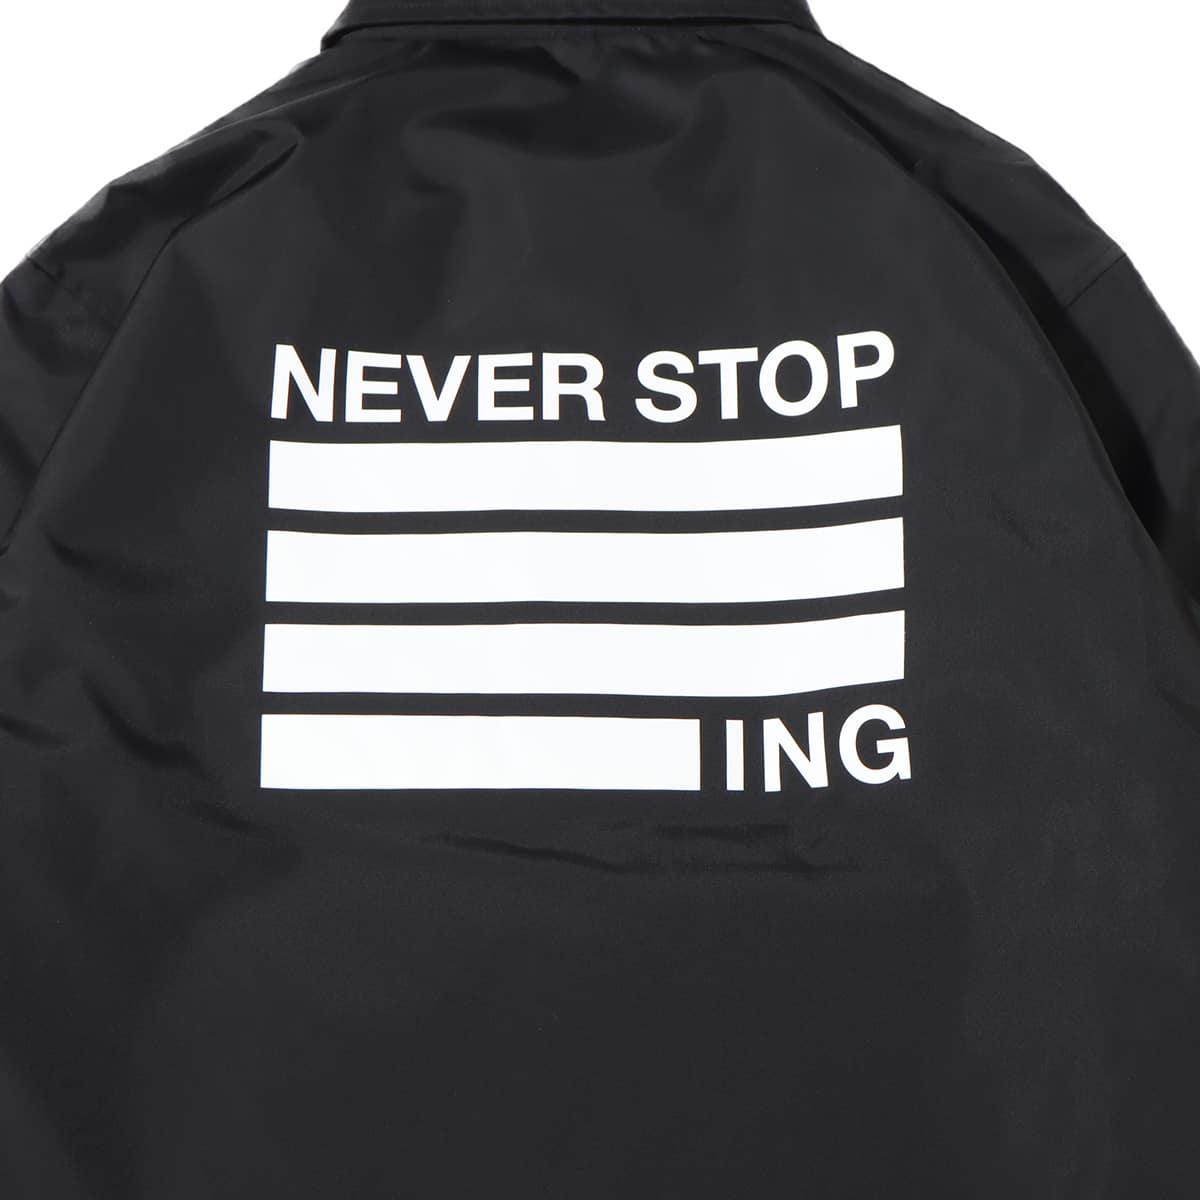 THE NORTH FACE NEVER STOP ING THE COACH JACKET BLACK